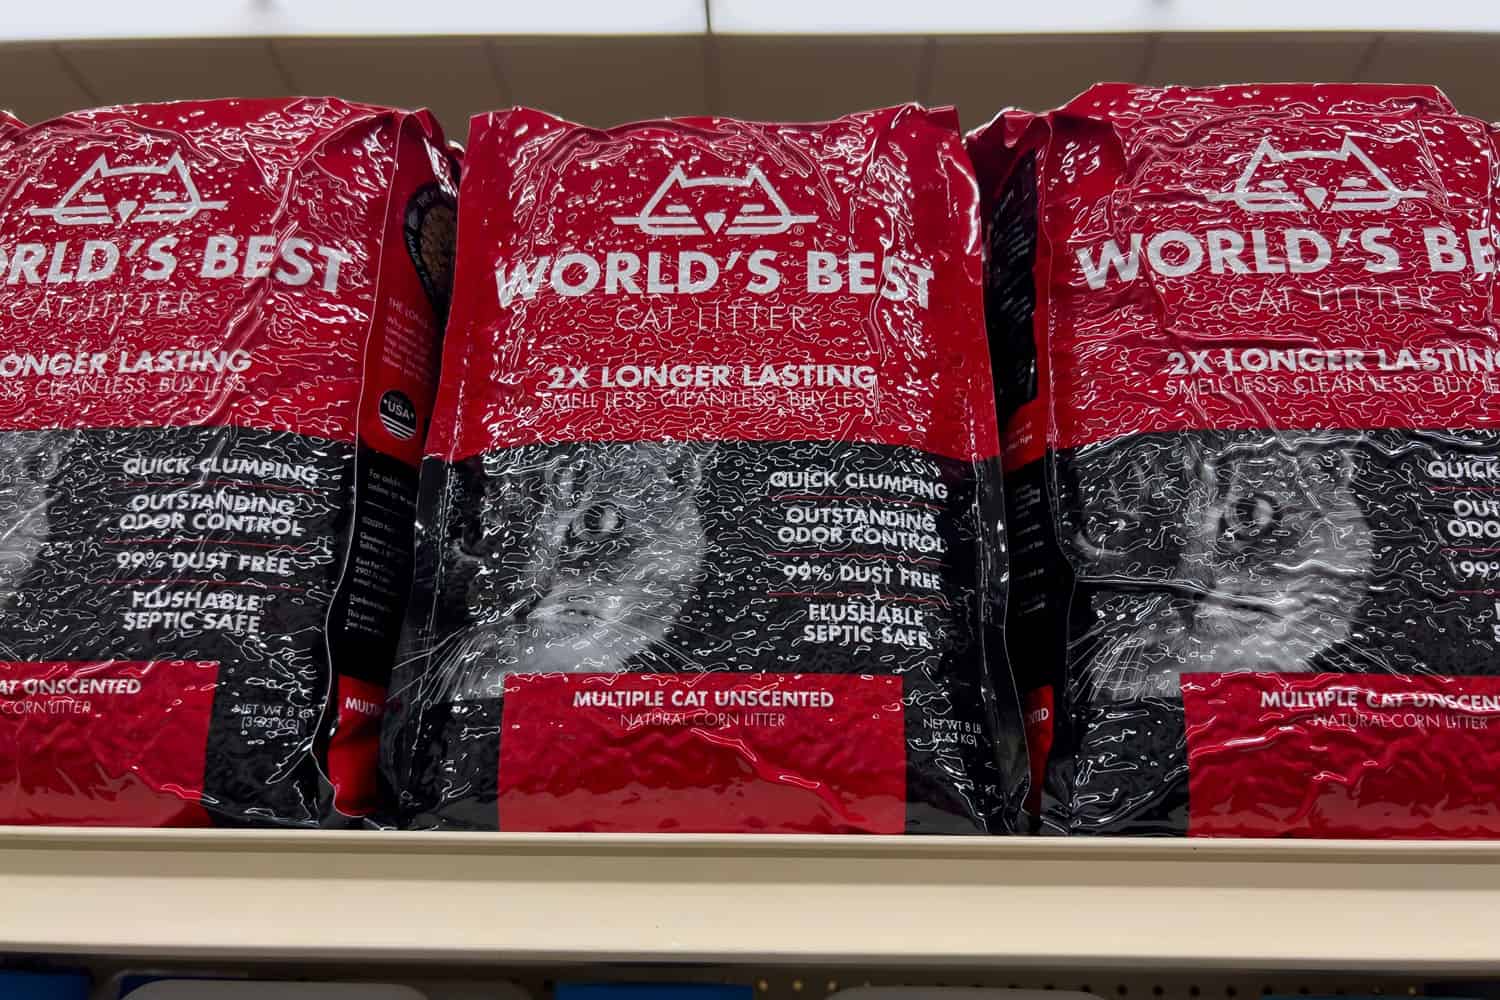 Close up view of Worlds Best cat litter for sale inside a grocery store.